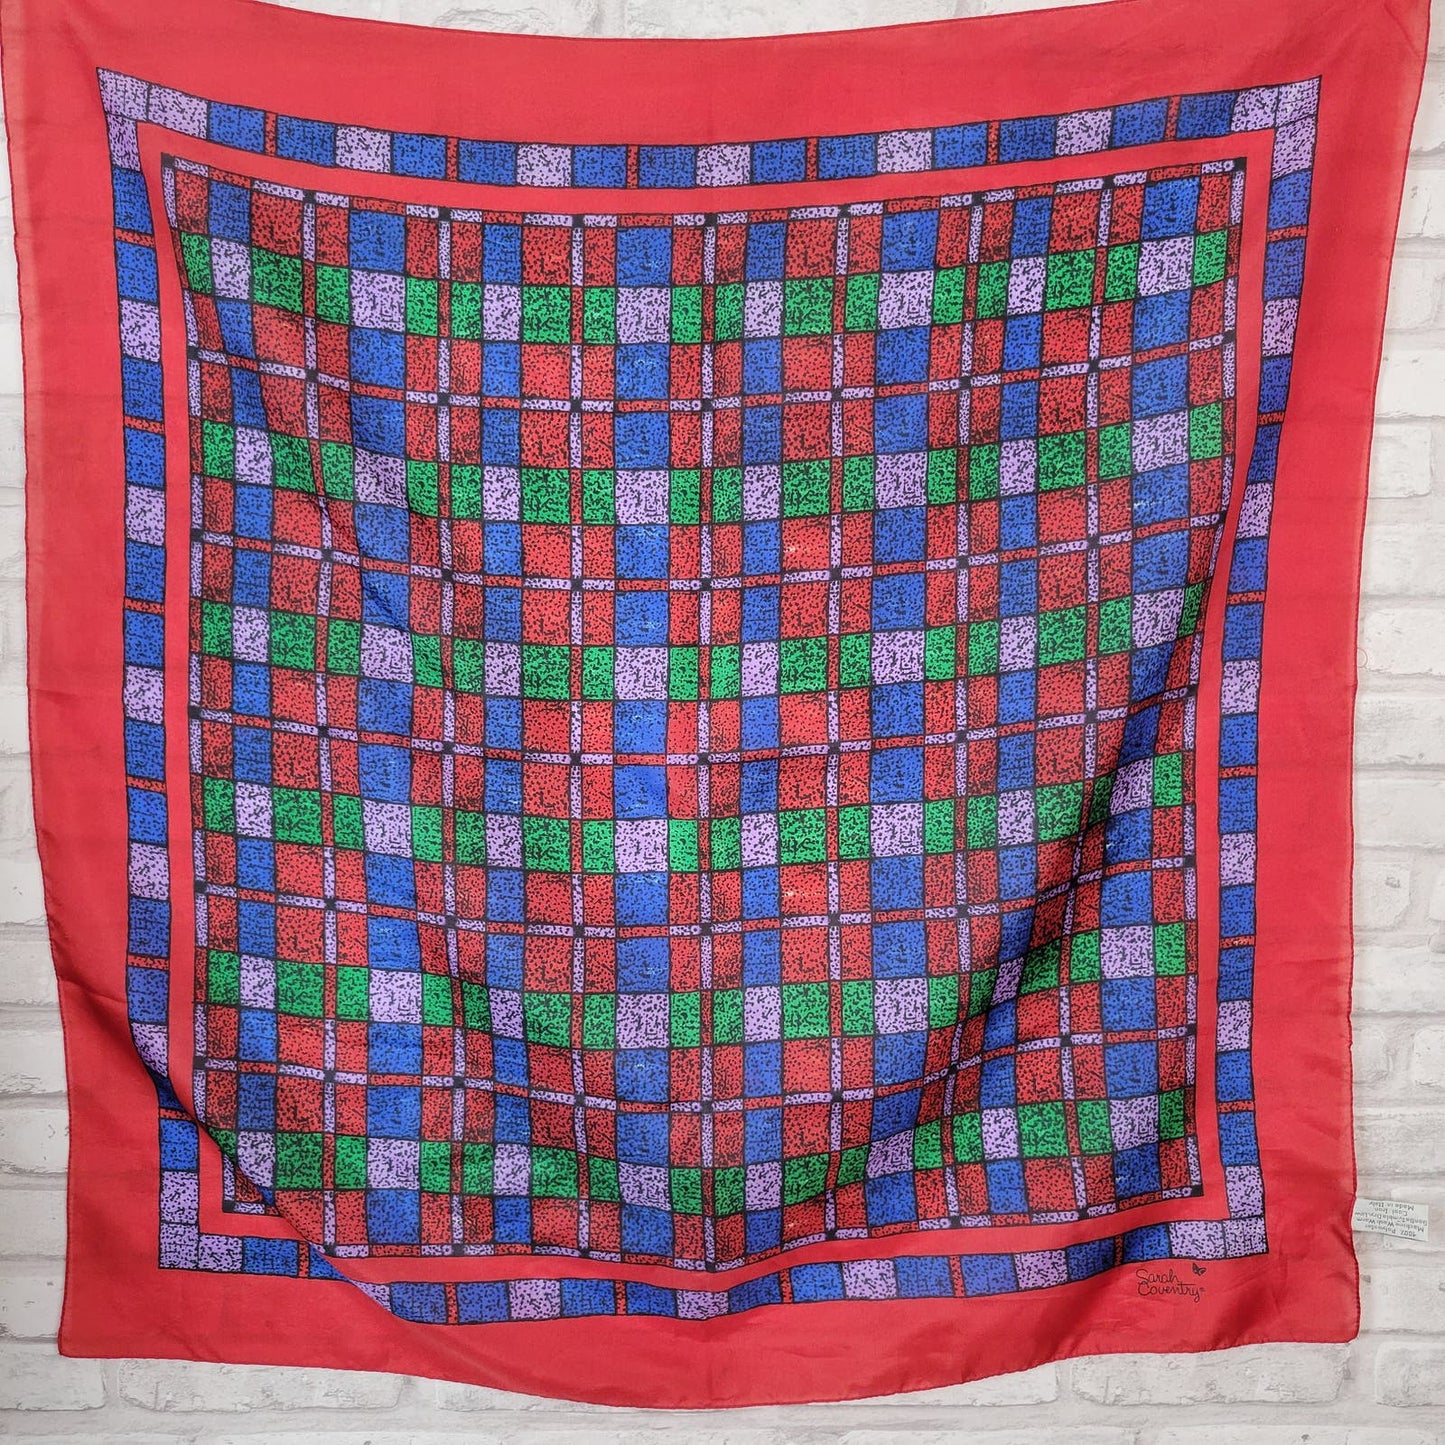 Sarah Coventry red blue purple green geometric square scarf polyester made in Italy vintage 1970s